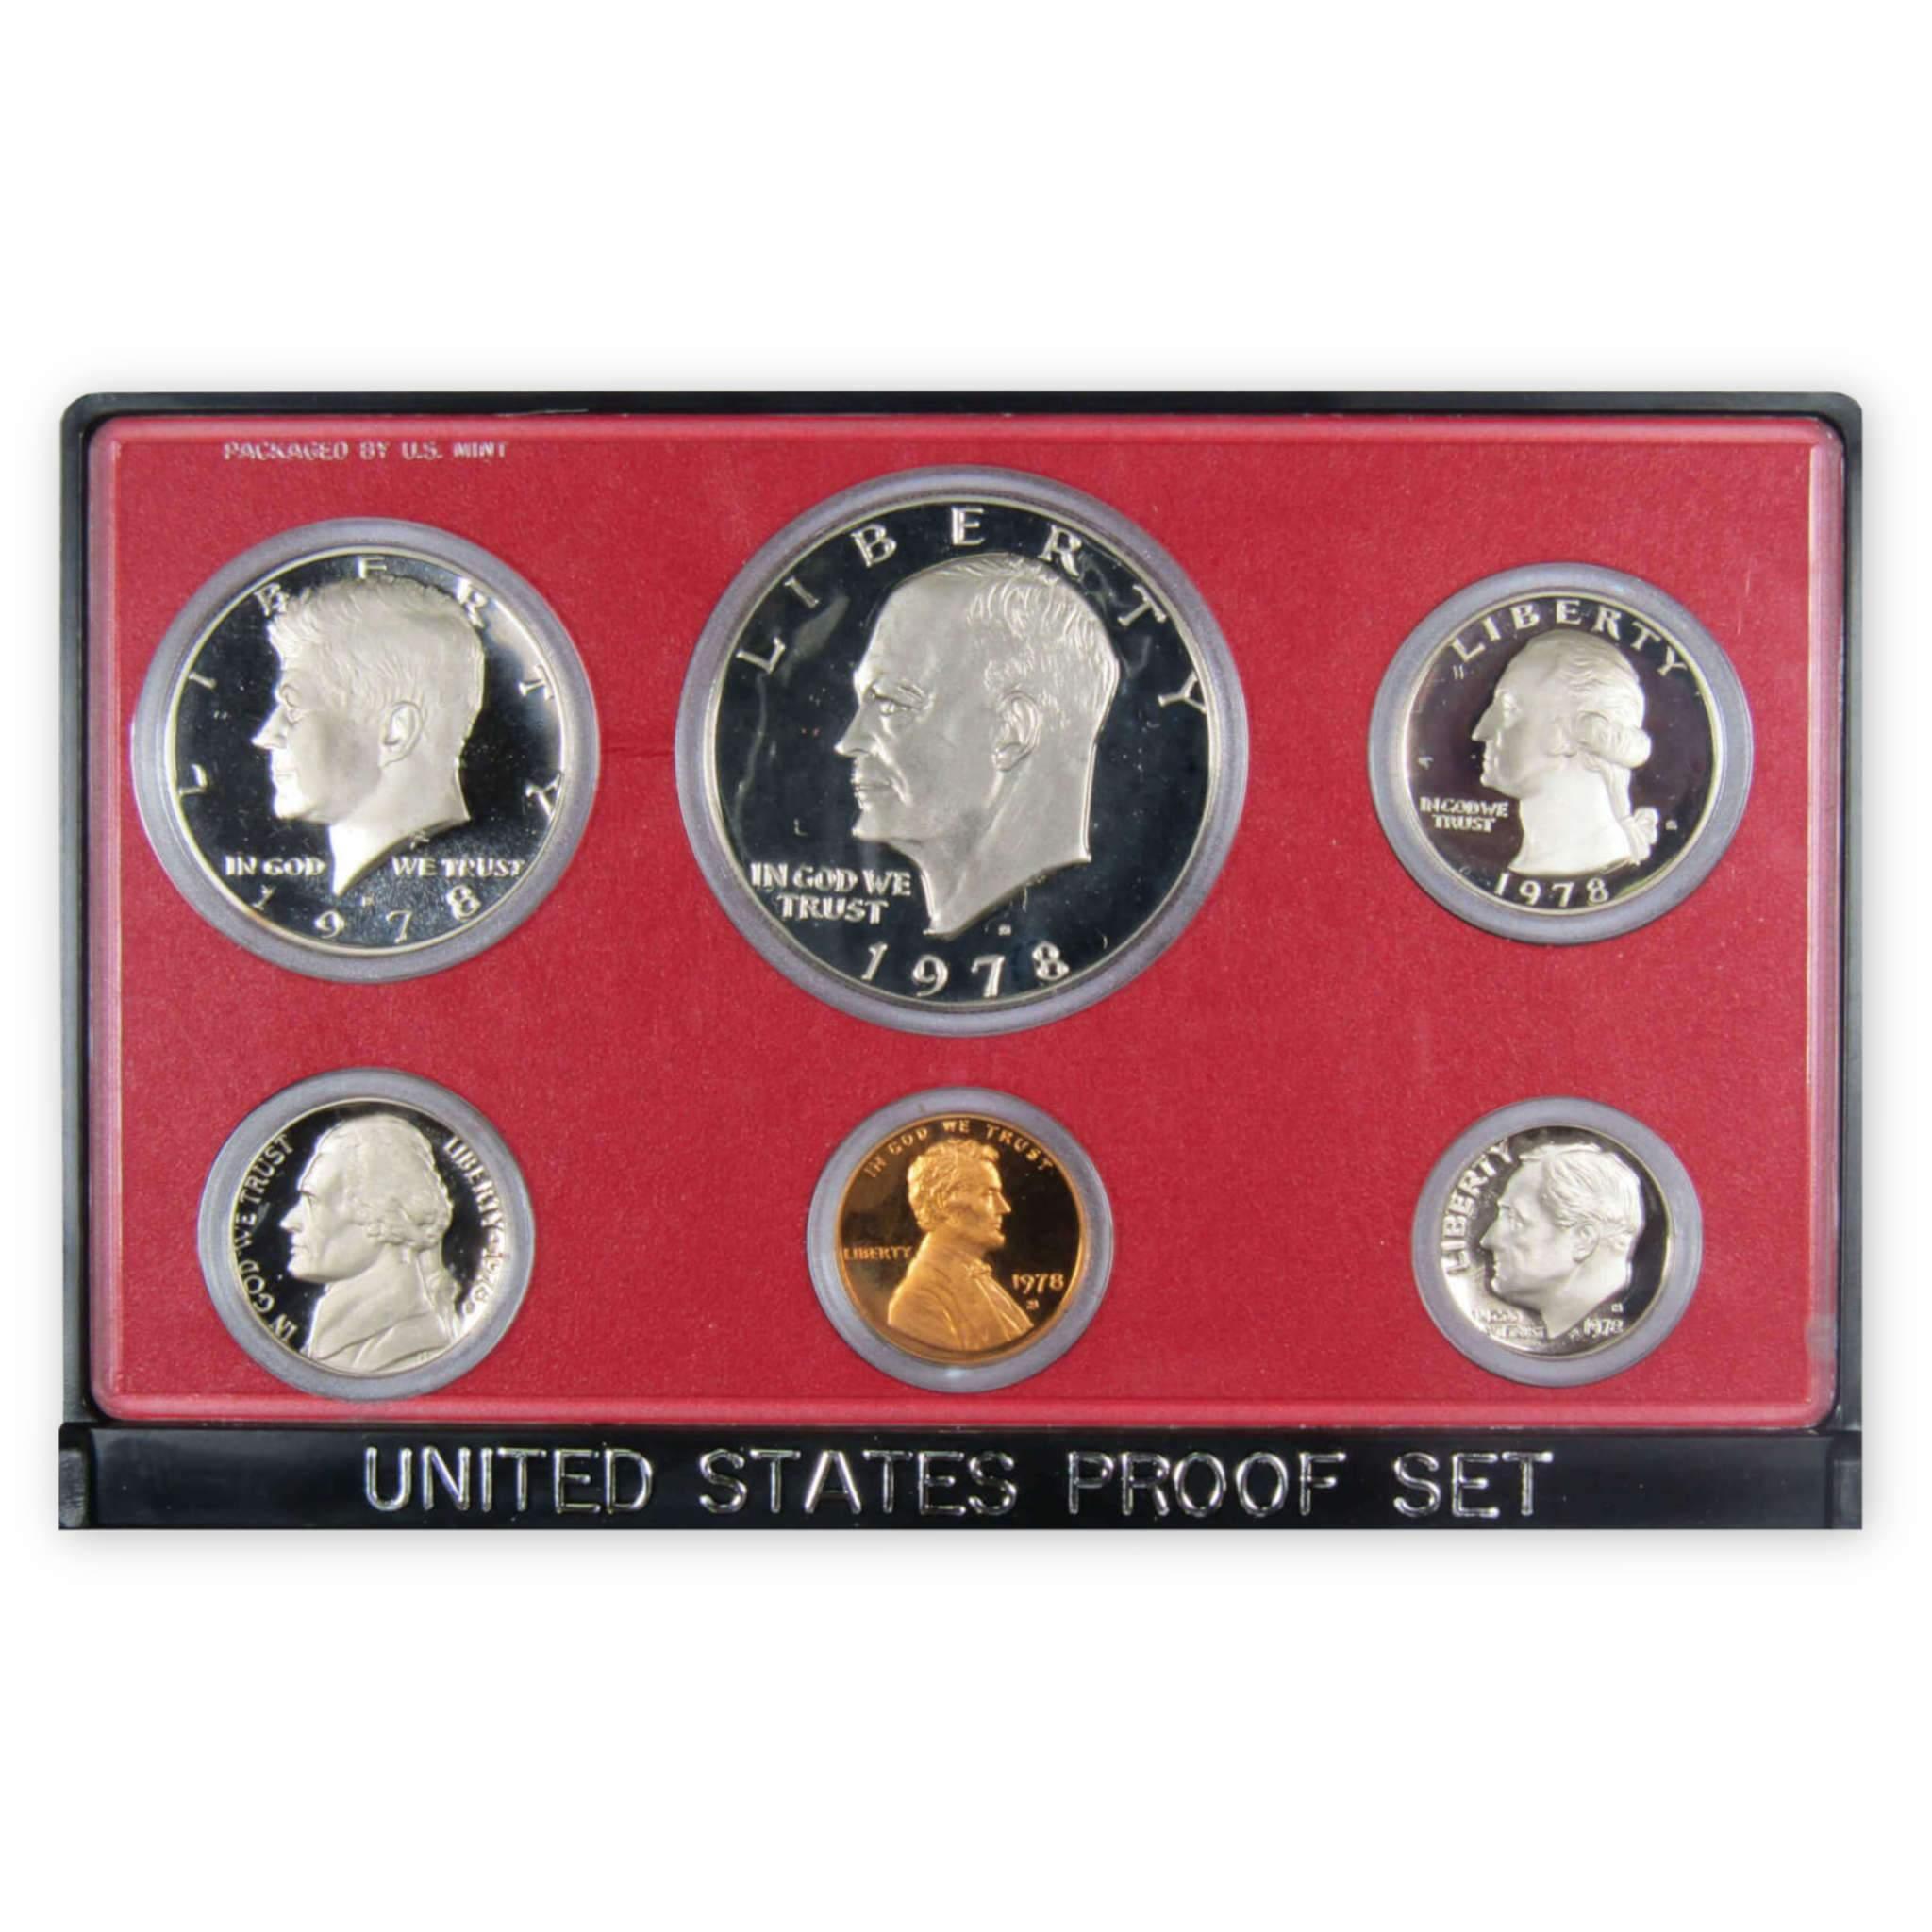 1978 Proof Set U.S. Mint Original Government Packaging OGP Collectible